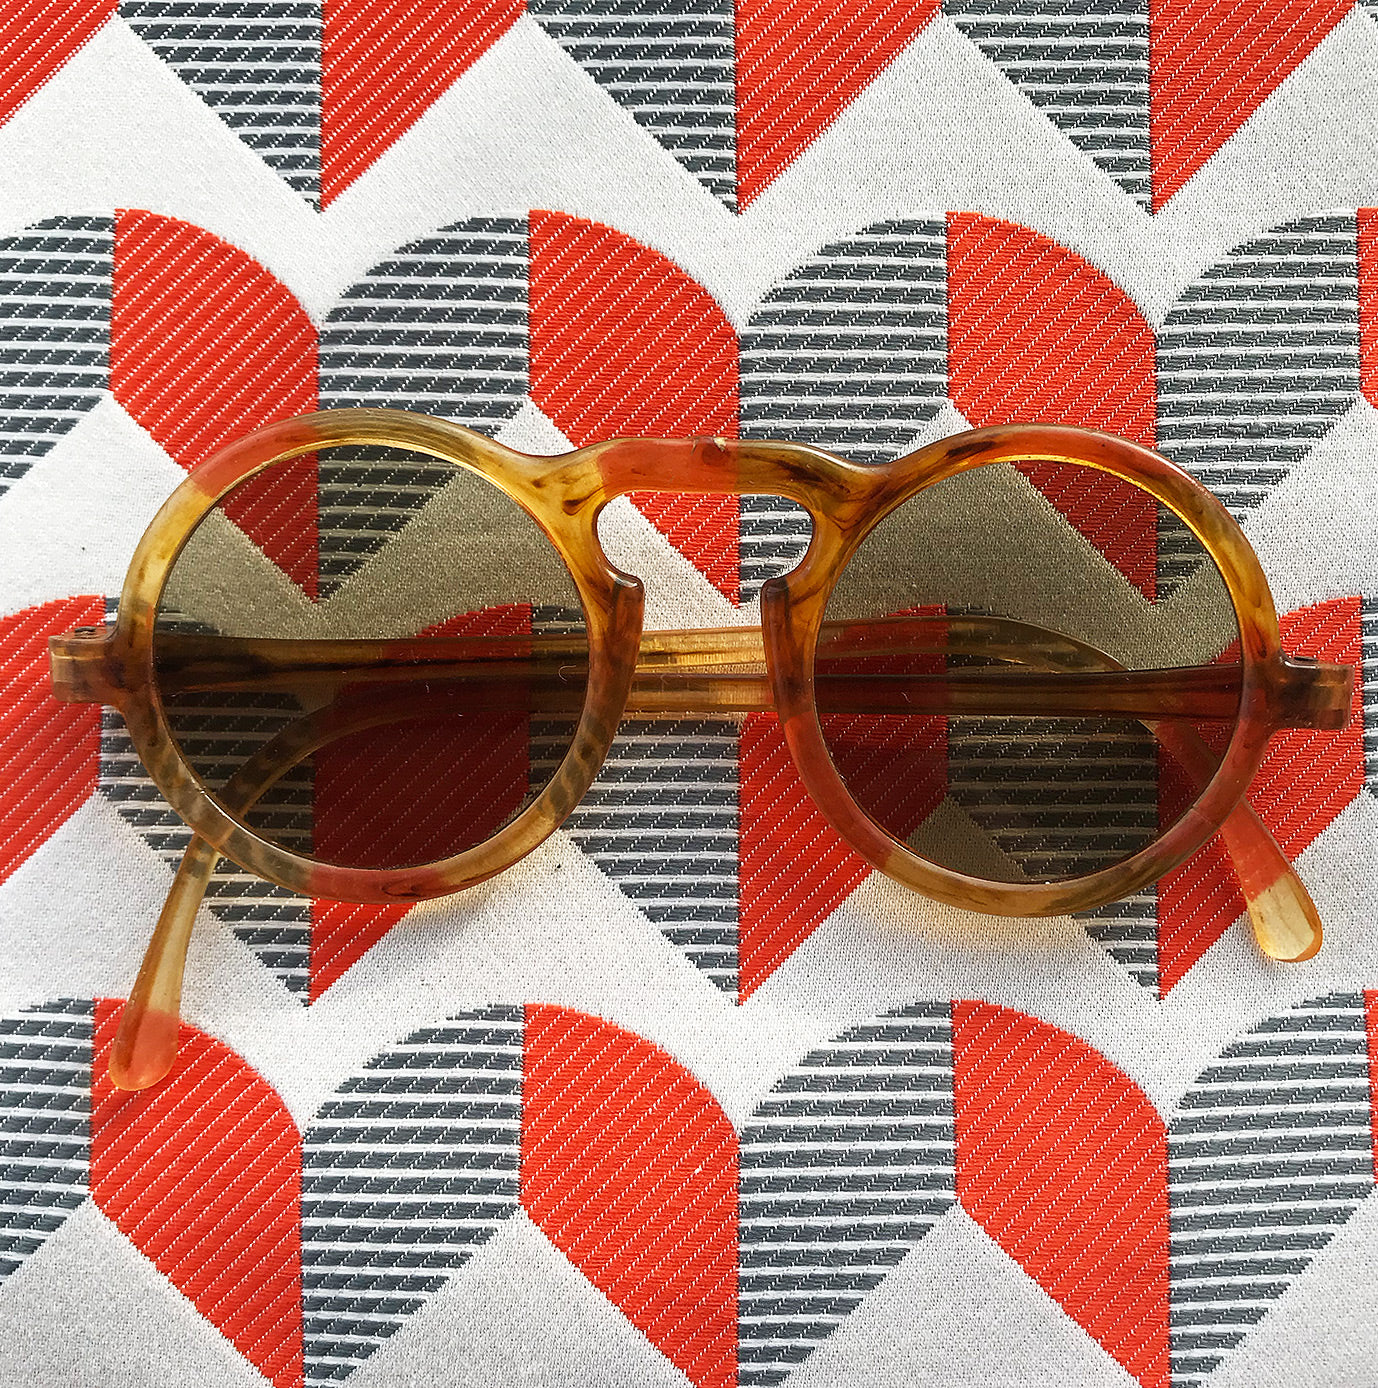 Cool, stylish pair of 1930s Art DecoSunglasses with snakeskin effect leather case. Ideal for the coming summer months - SHOP NOW - www.intovintage.co.uk